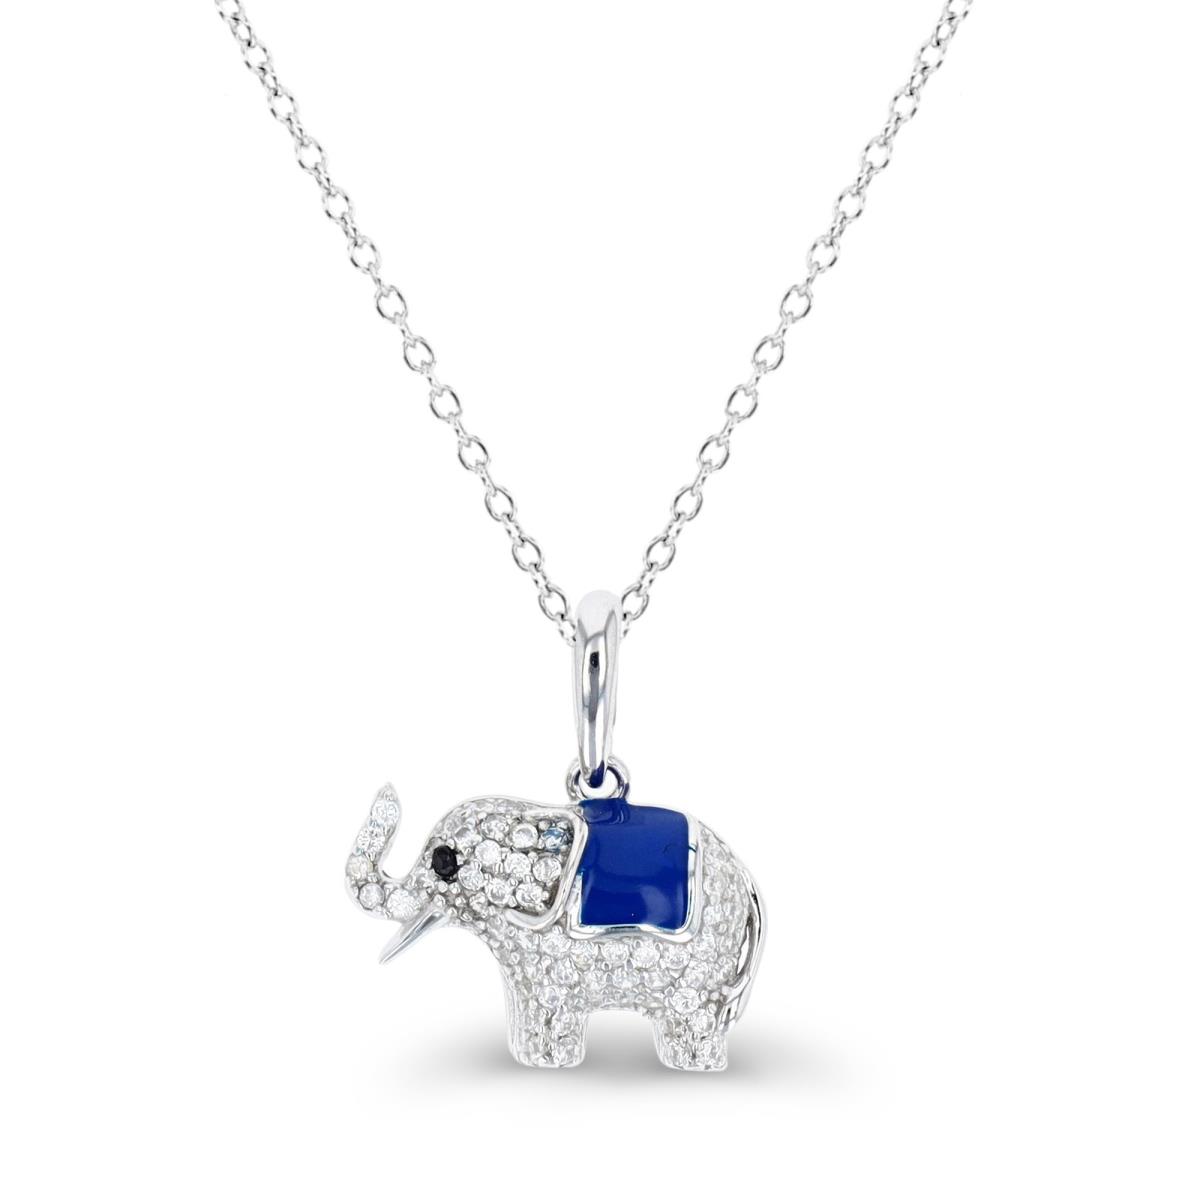 Sterling Silver Rhodium 17.5X15.5MM Elephant White & Black CZ with Blue Enamel 18" Necklace